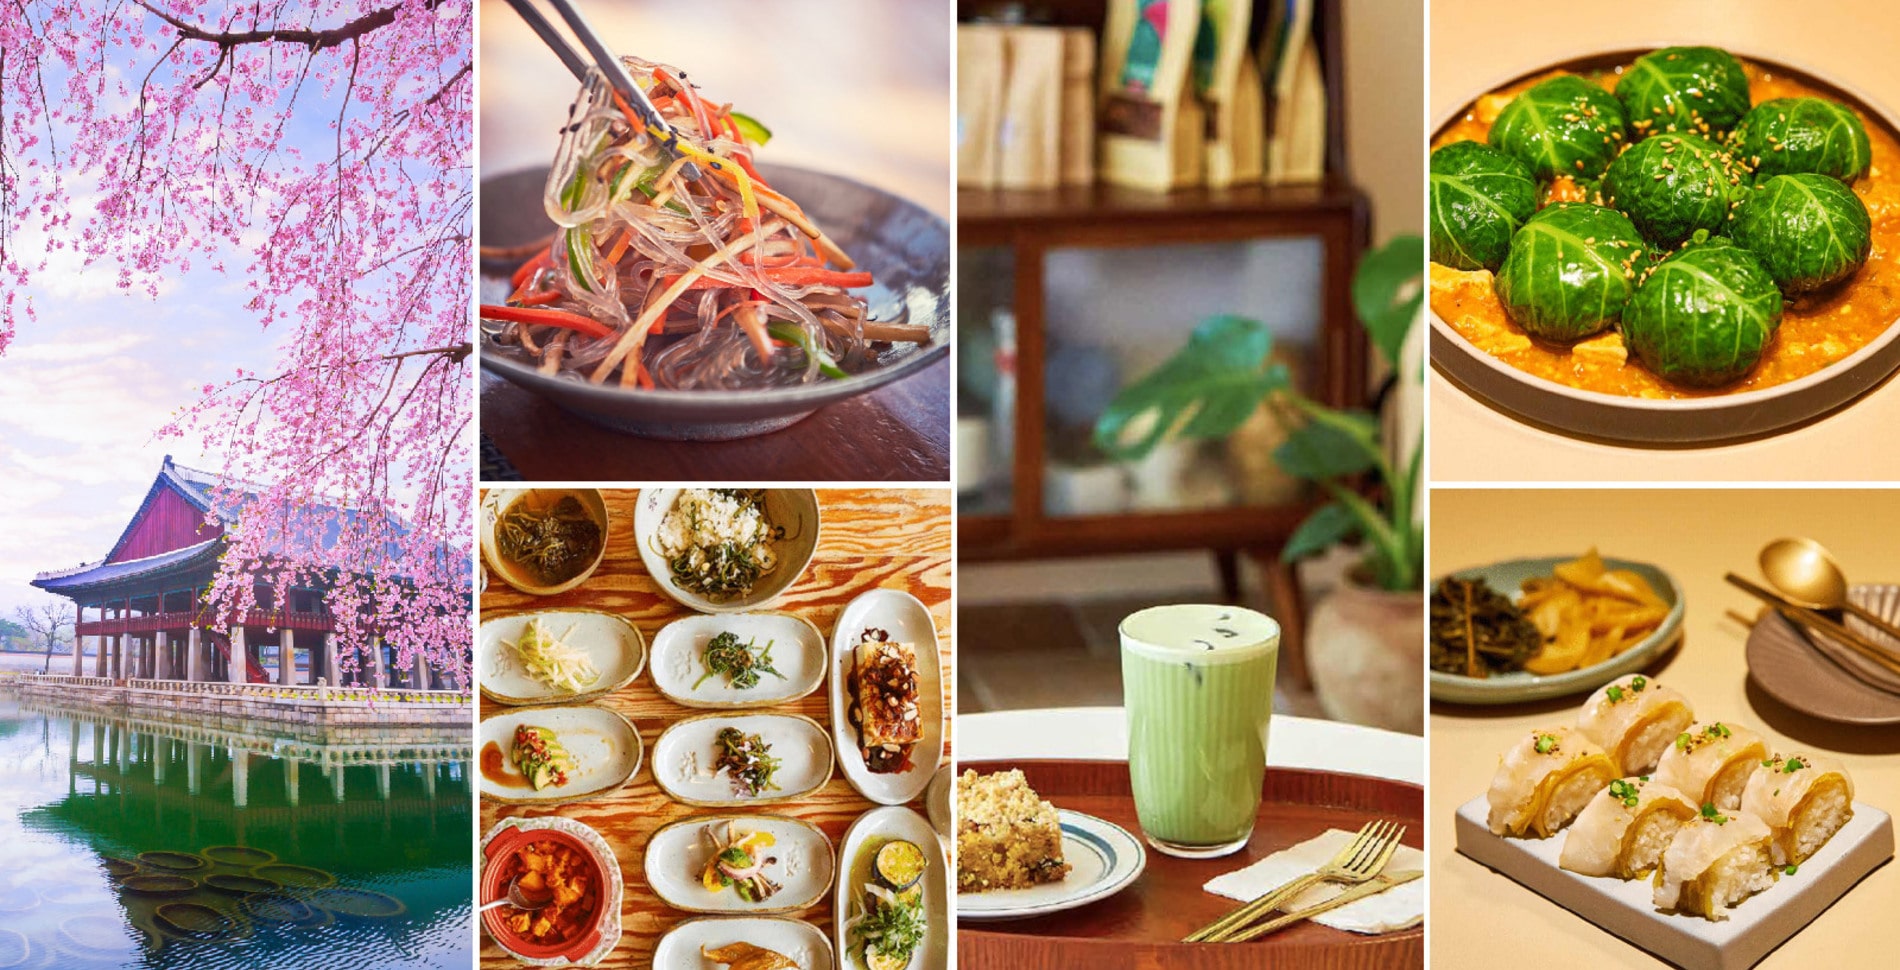 From Street Food to Restaurants: Why South Korea May be the Next Vegan Hotspot